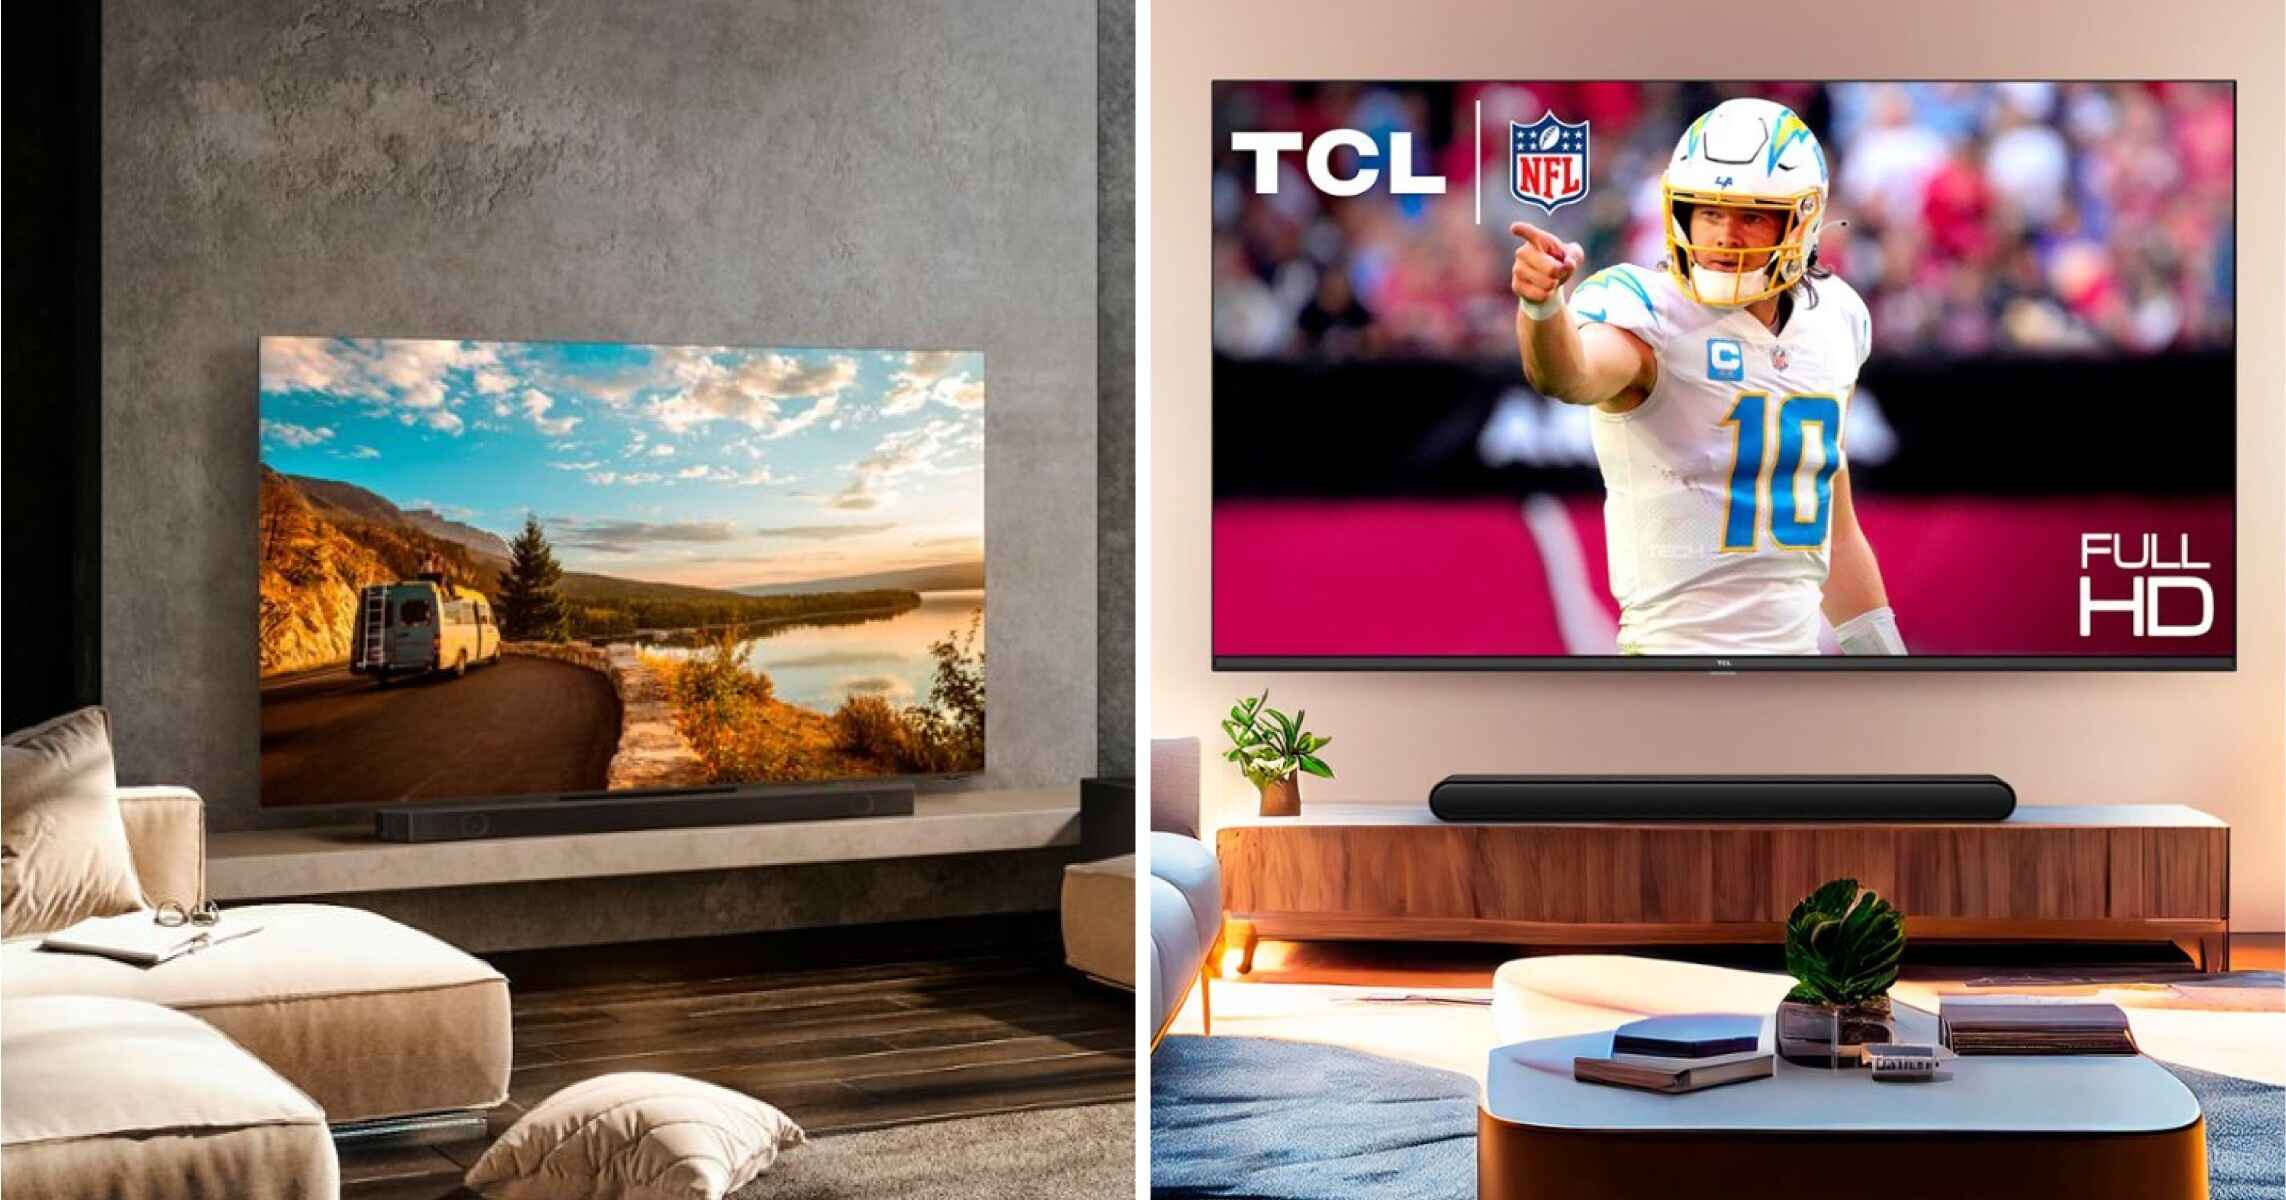 how-to-connect-my-laptop-to-tcl-smart-tv